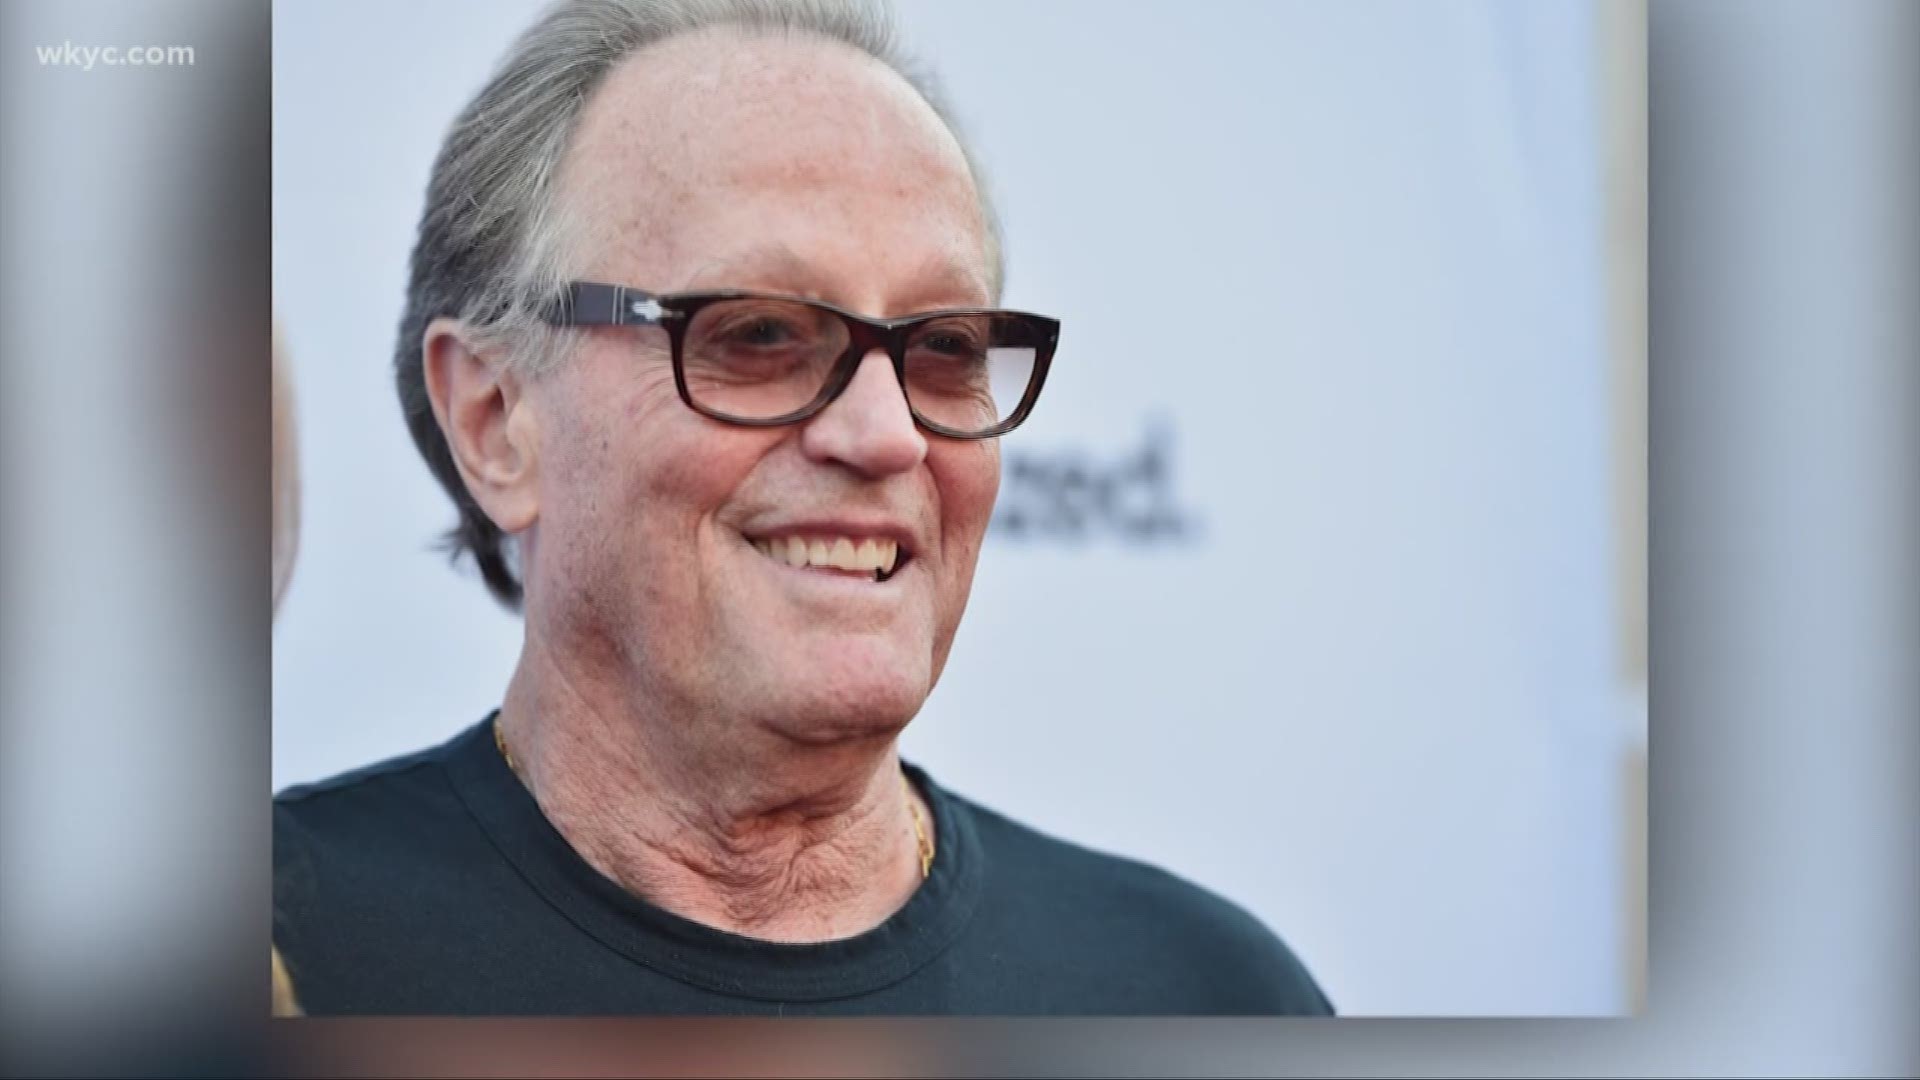 Peter Fonda died Friday morning after suffering respiratory failure due to lung cancer, his family said in a statement.